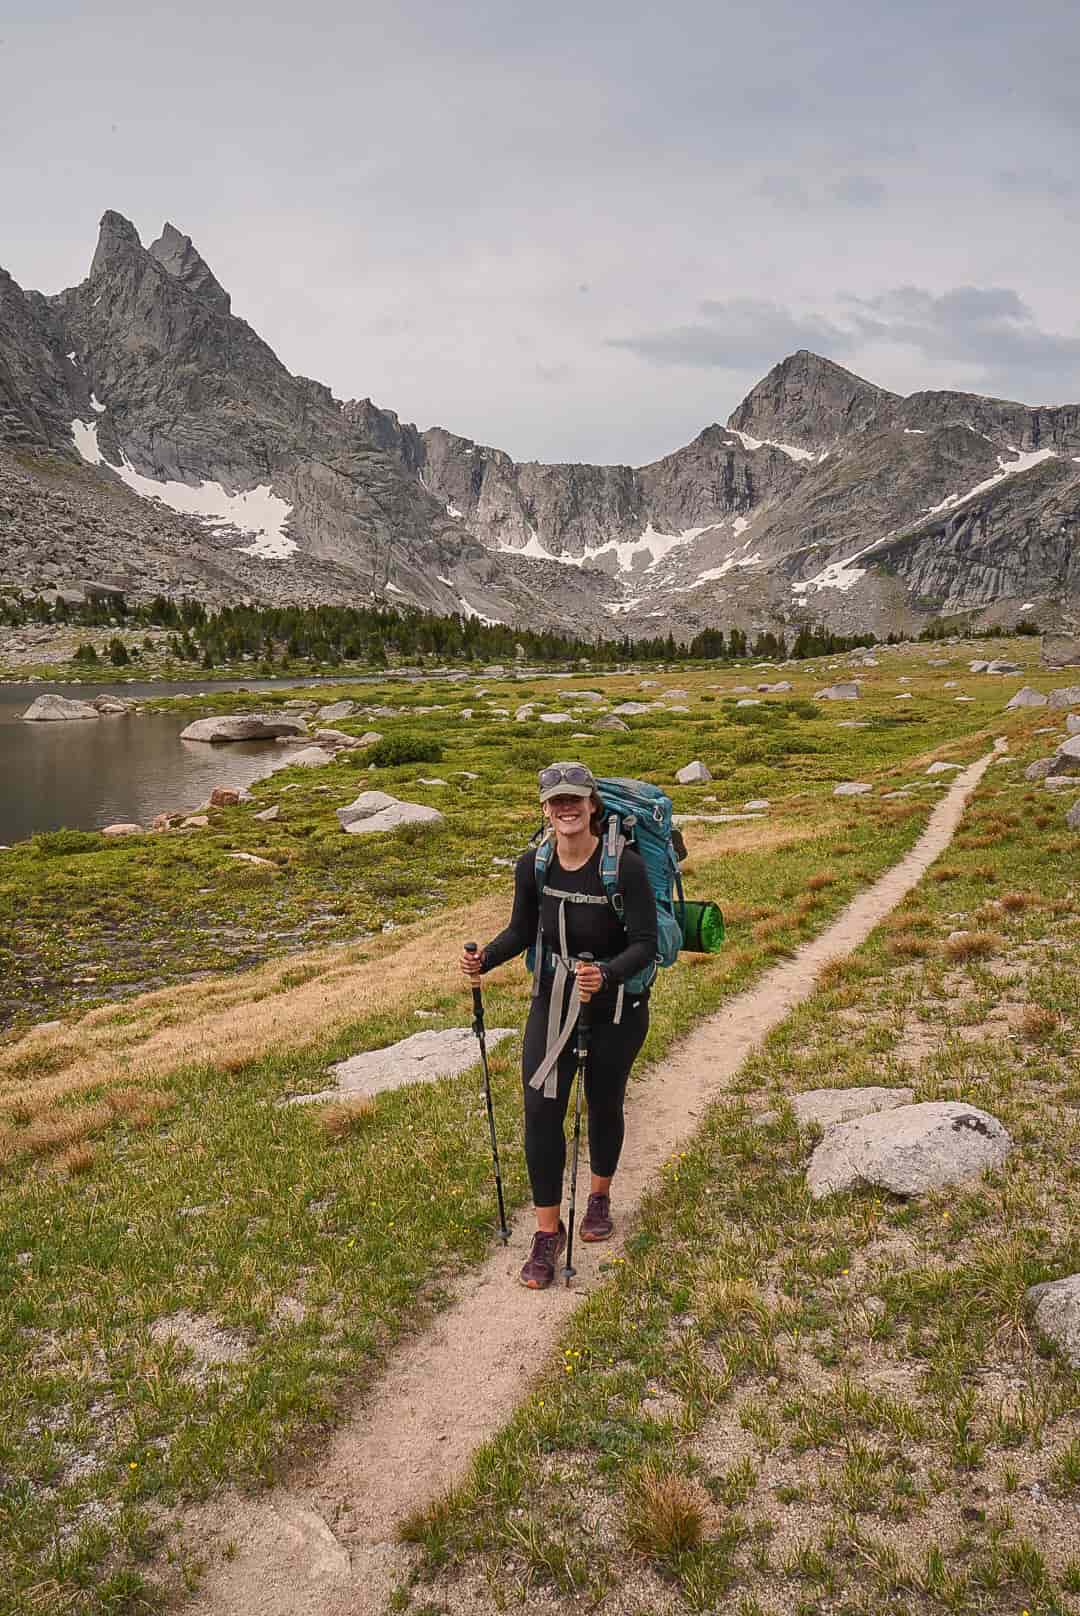 Woman wearing all black wearing a blue backpacking pack and holding hiking poles stands on a trail with a lake and mountains behind her while backpacking in the Wind River Range.